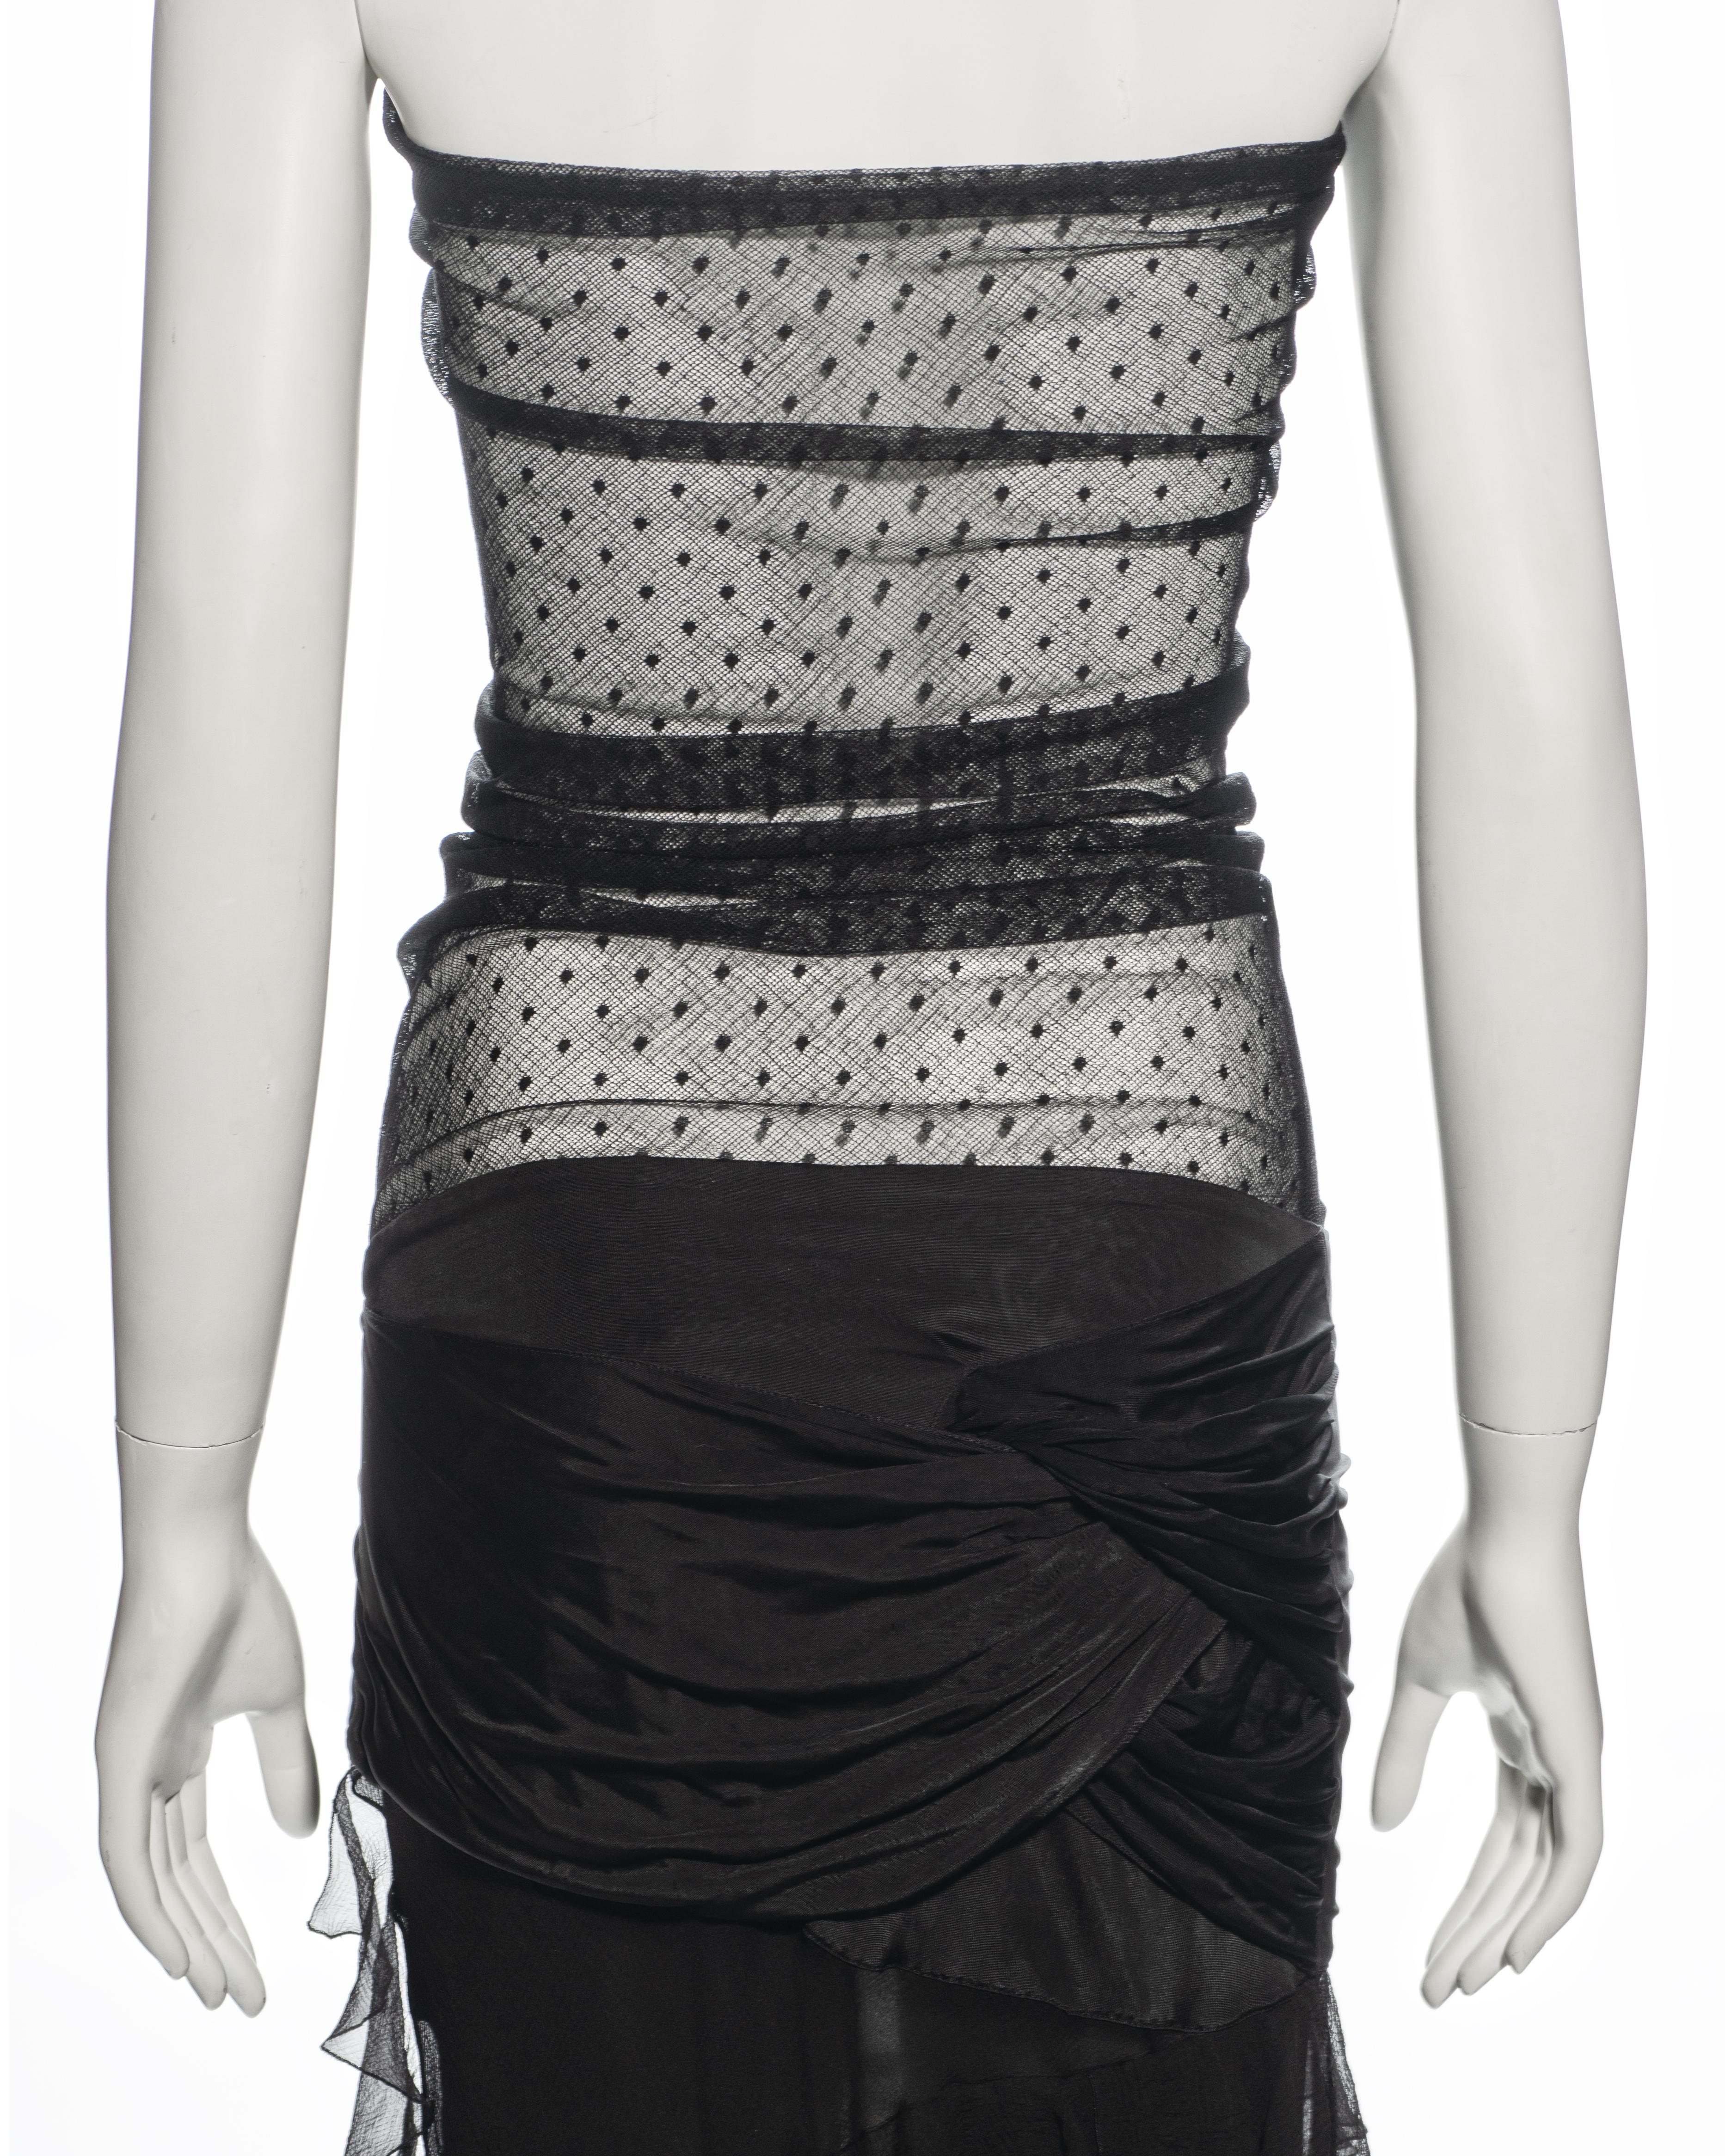 Christian Dior by John Galliano Black Strapless Silk and Mesh Dress, ss 2004 For Sale 8